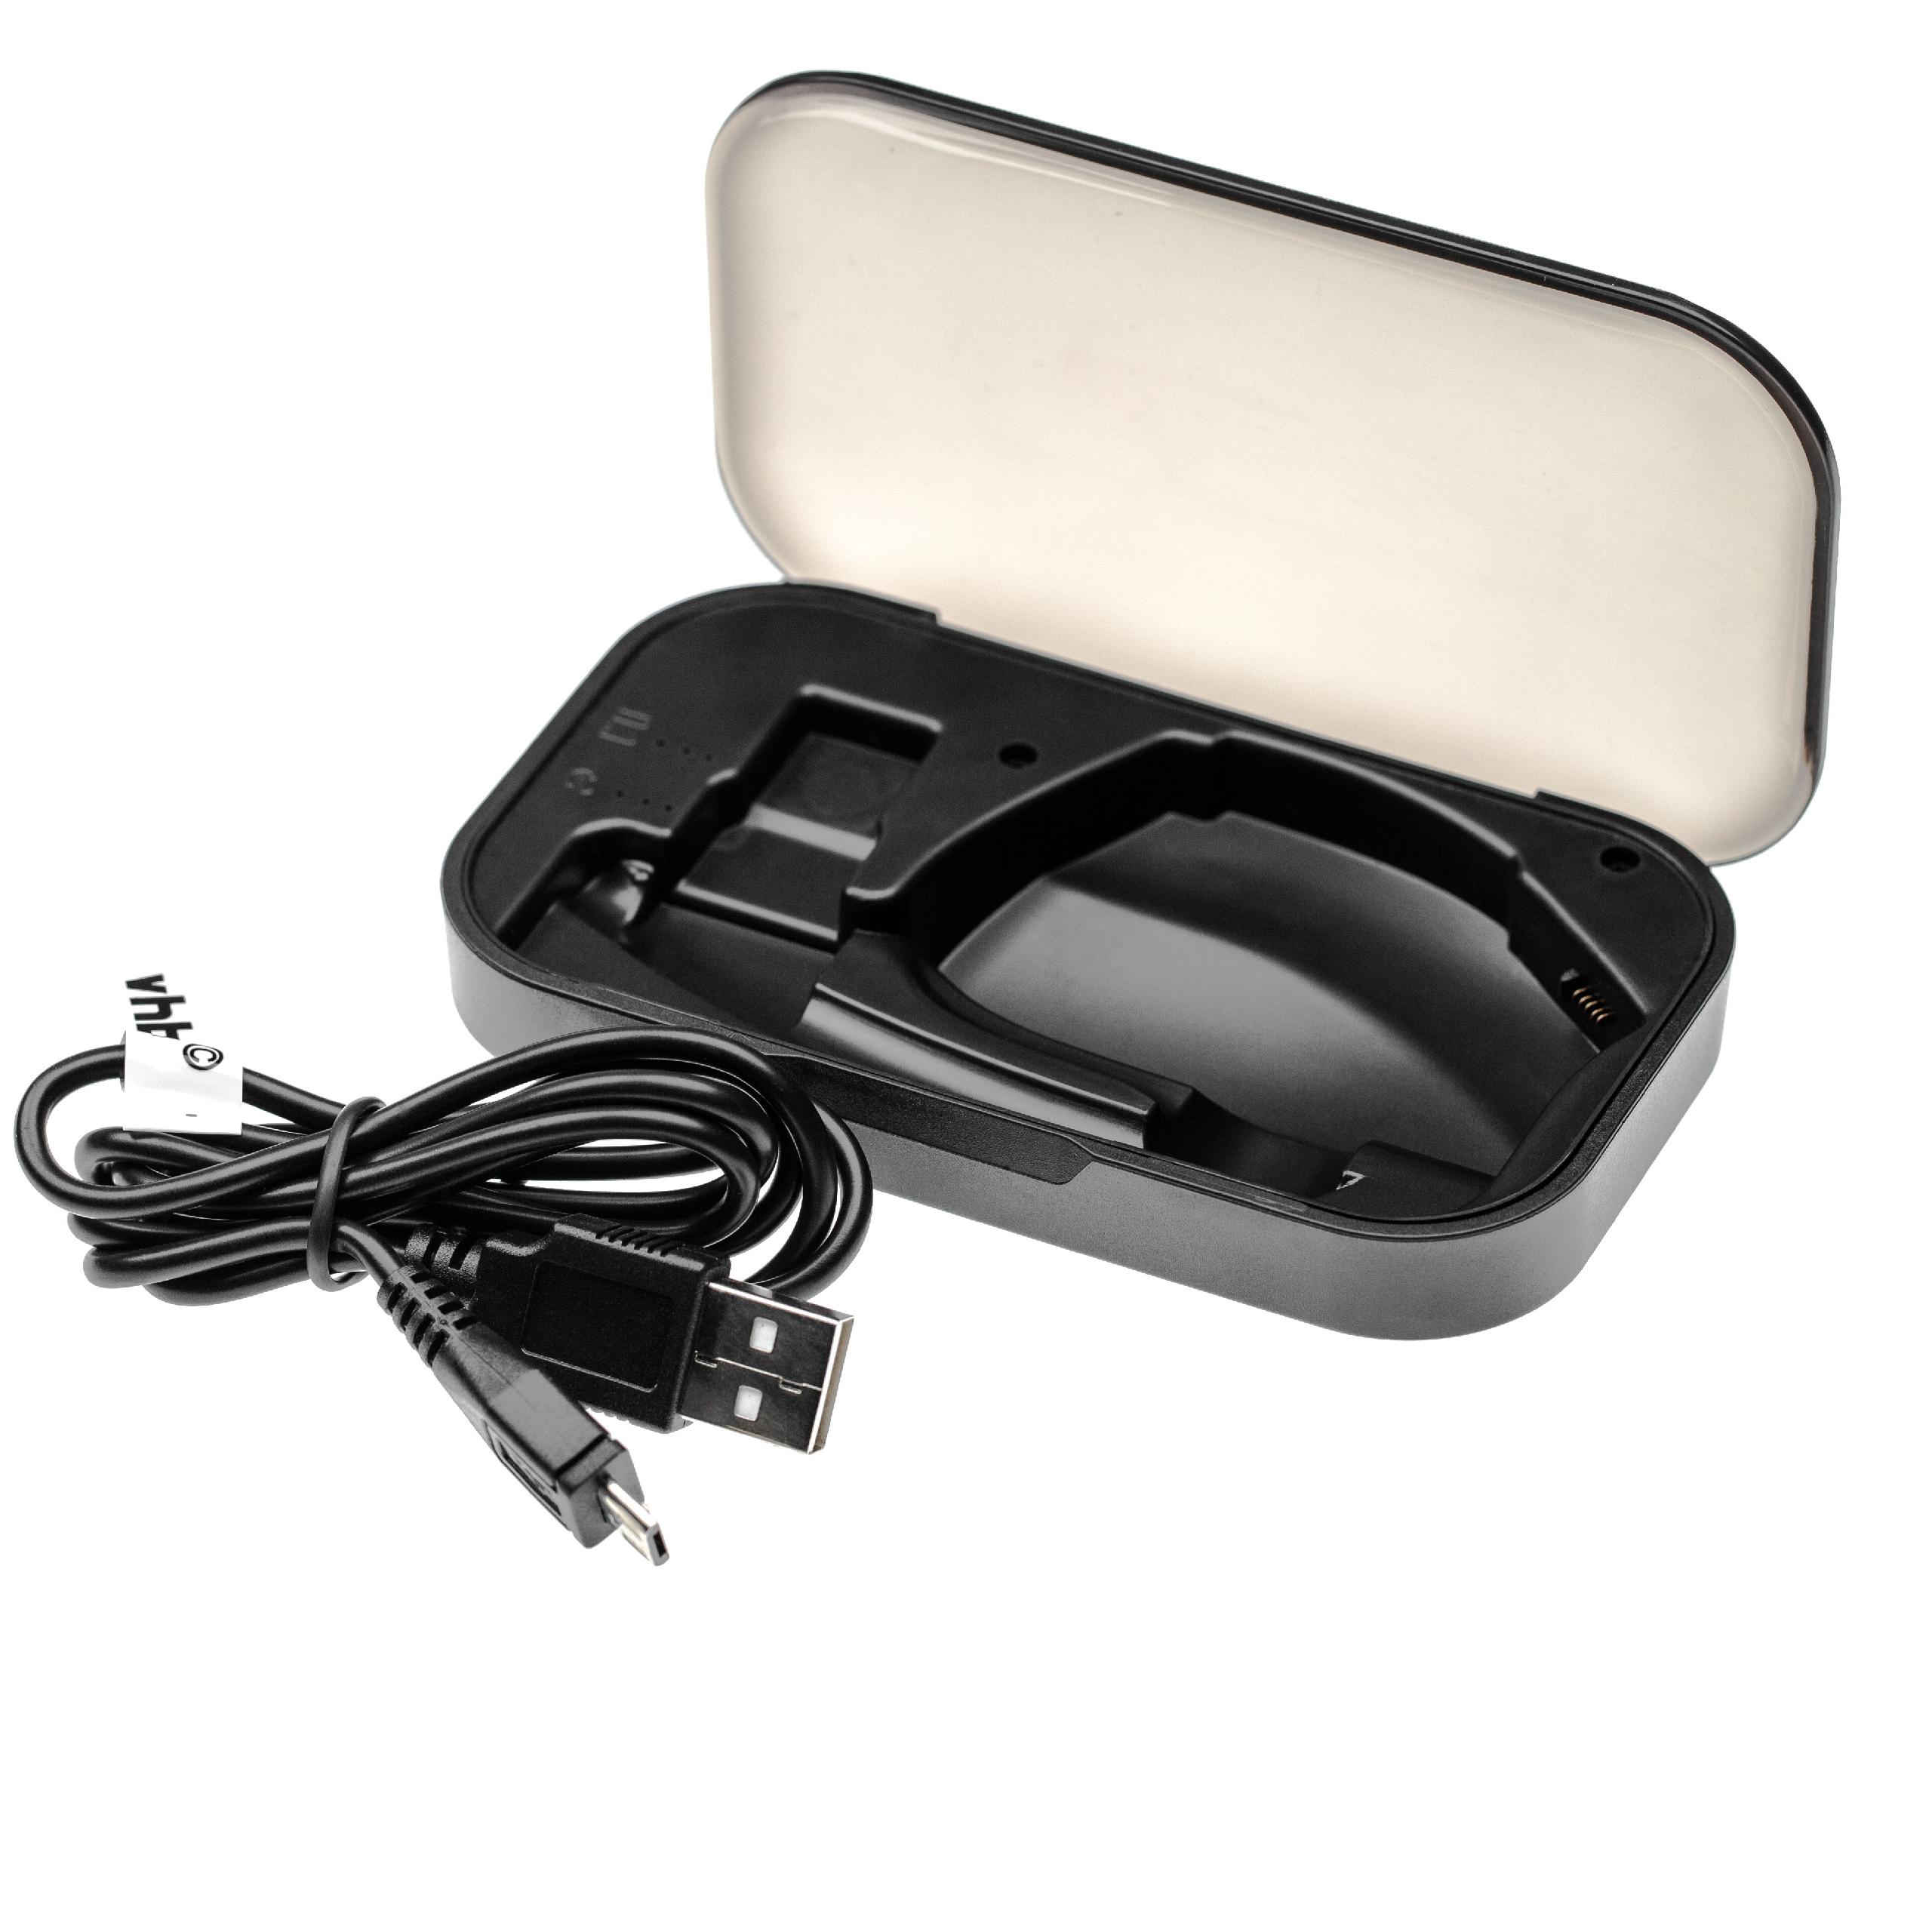 Charging Box suitable for Plantronics Voyager Legend UC Headset - Incl. USB Charger Cable Black